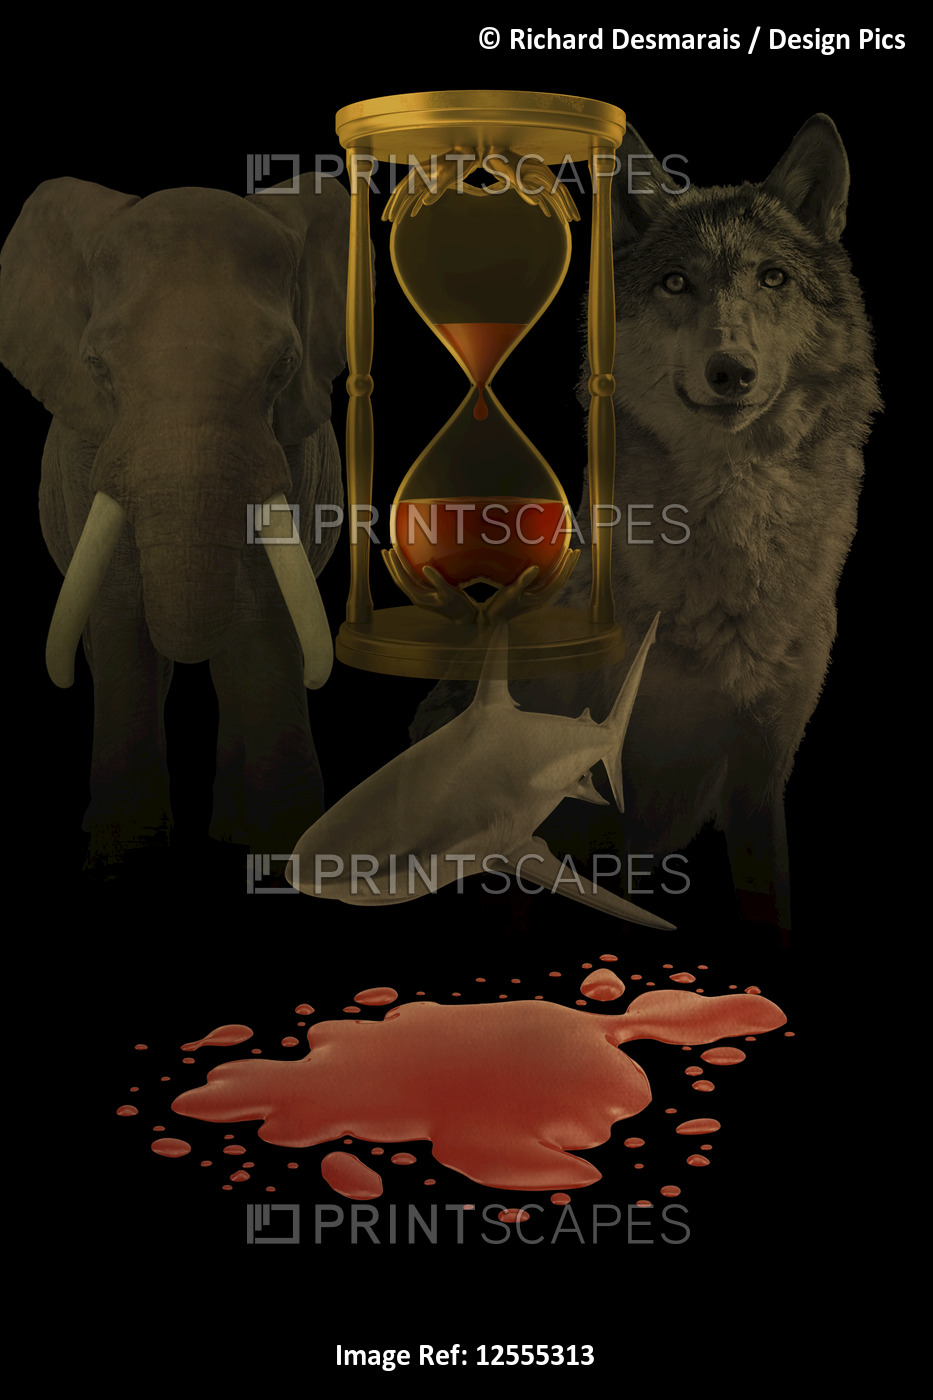 A composite image of an hour glass of blood, surrounded by animals